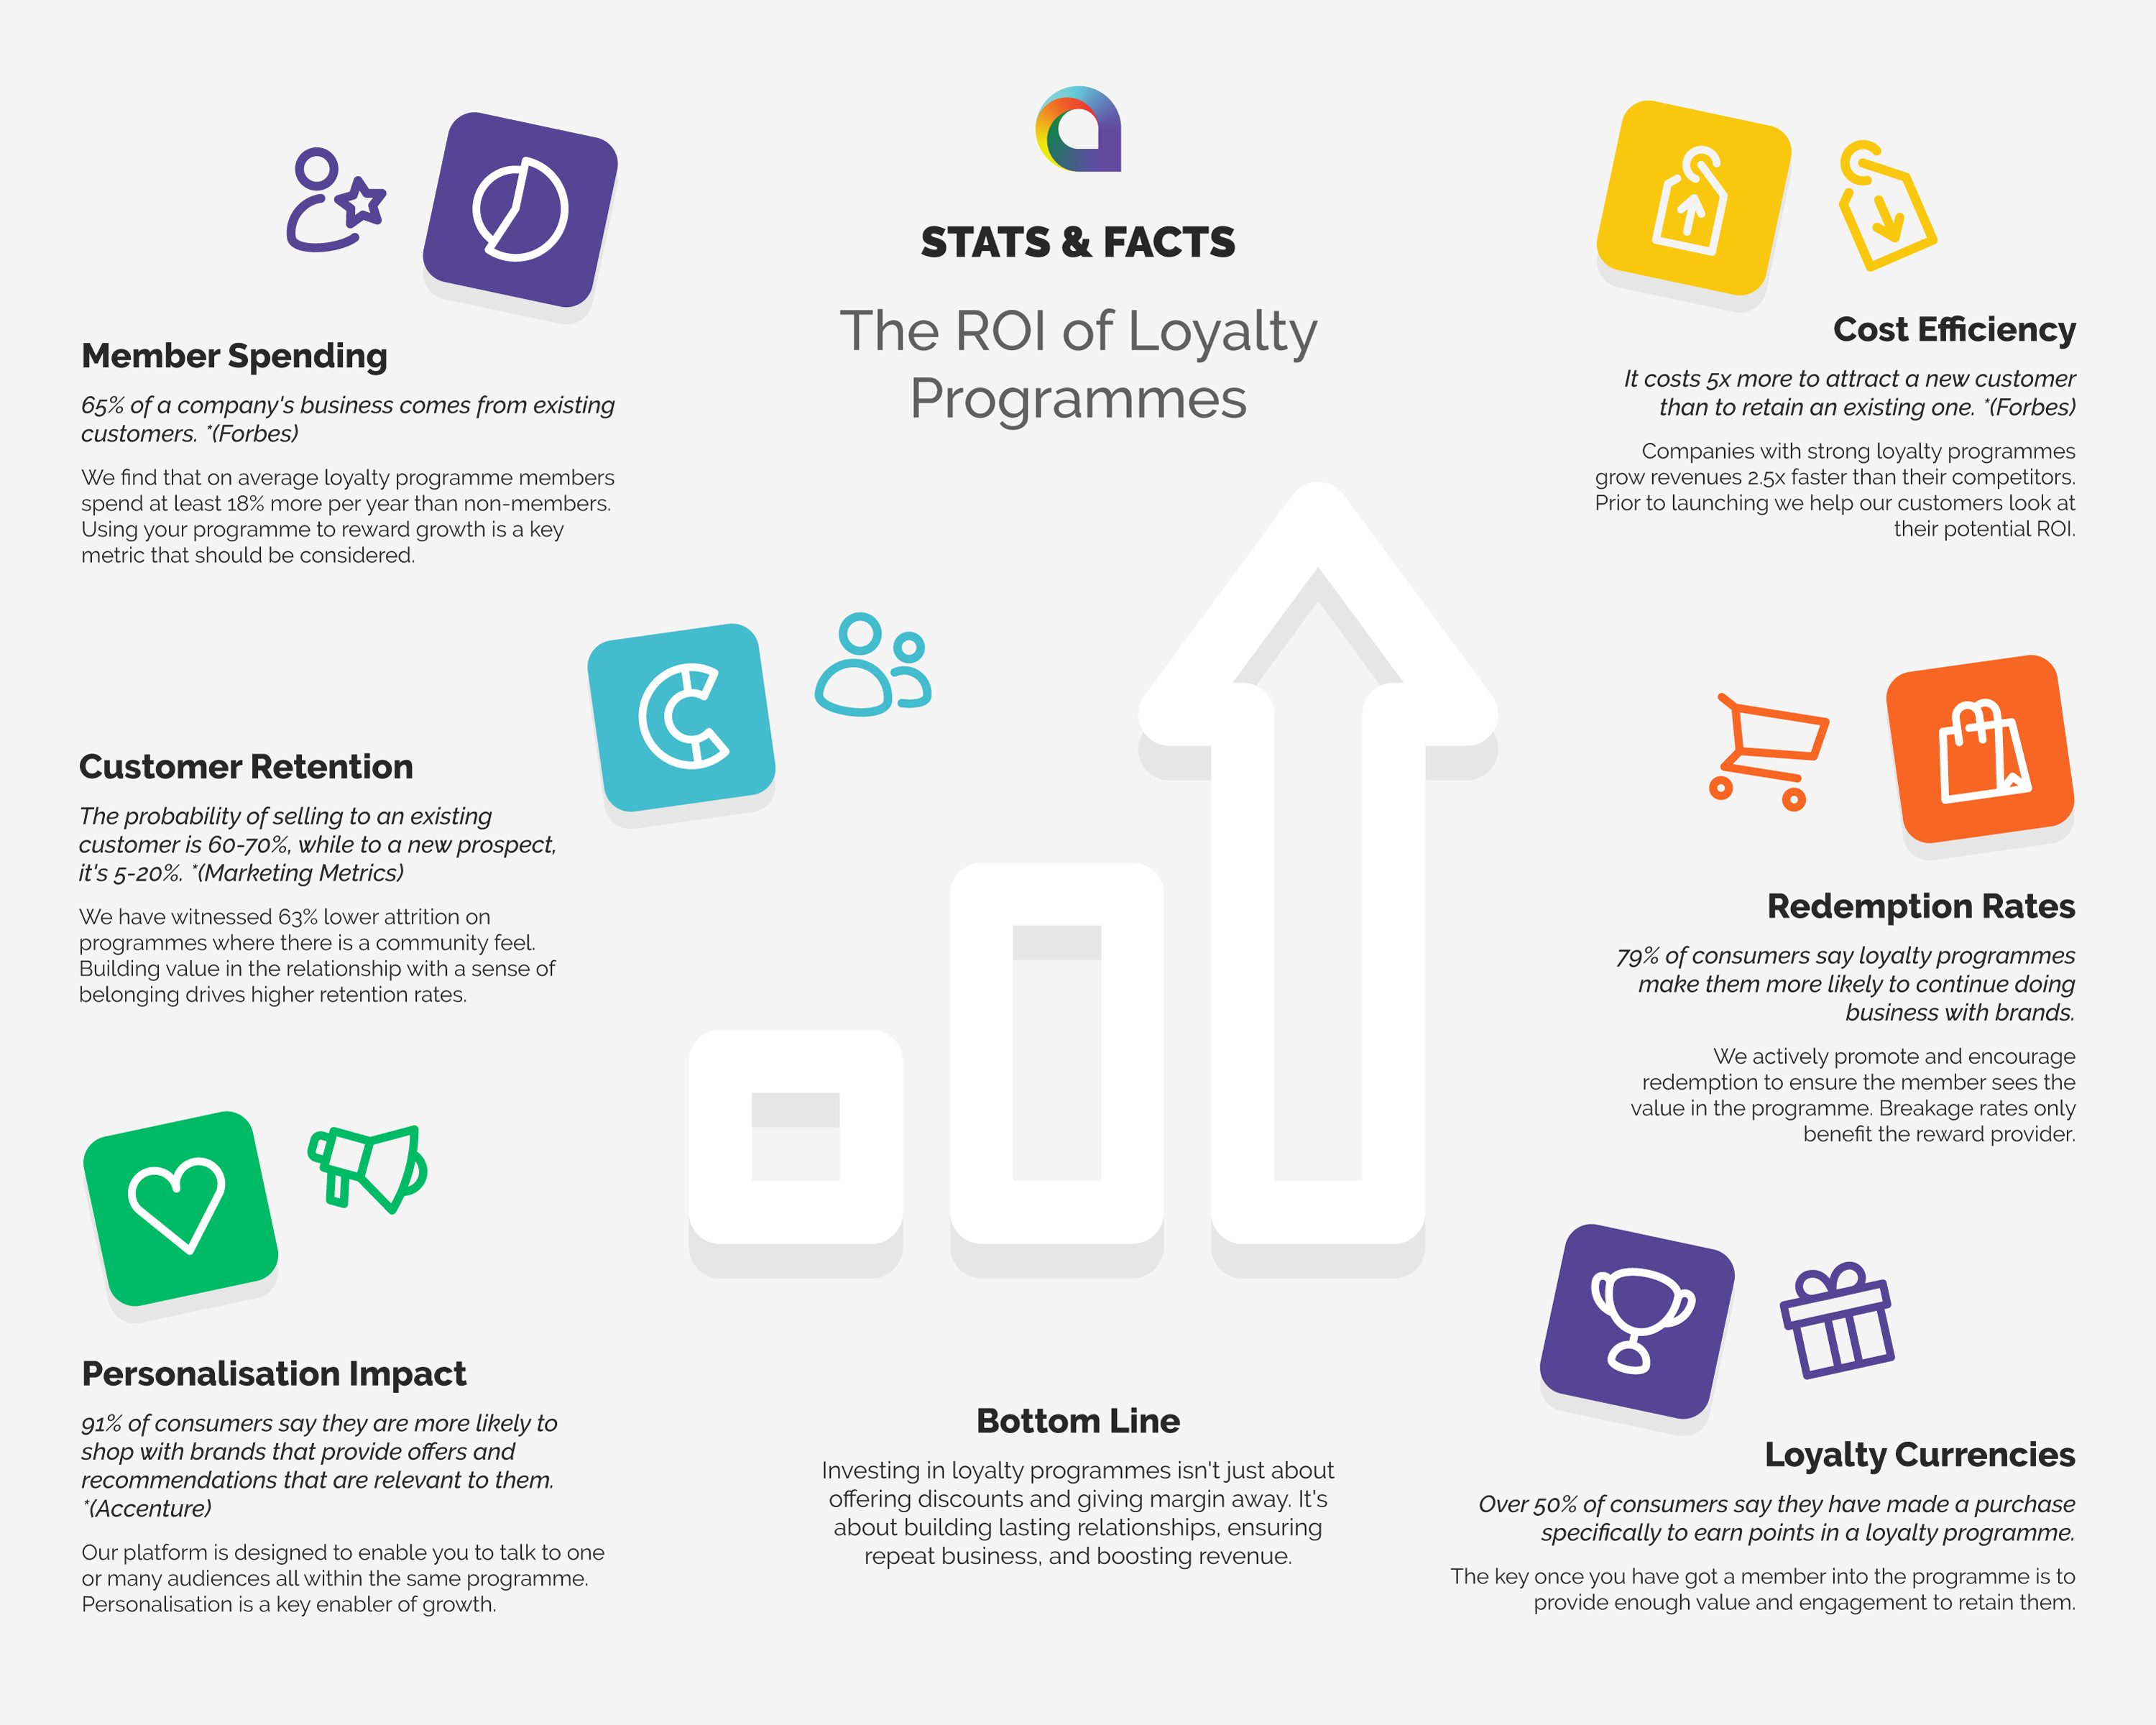 The ROI of Loyalty Programmes; The Real Impact for Your Business